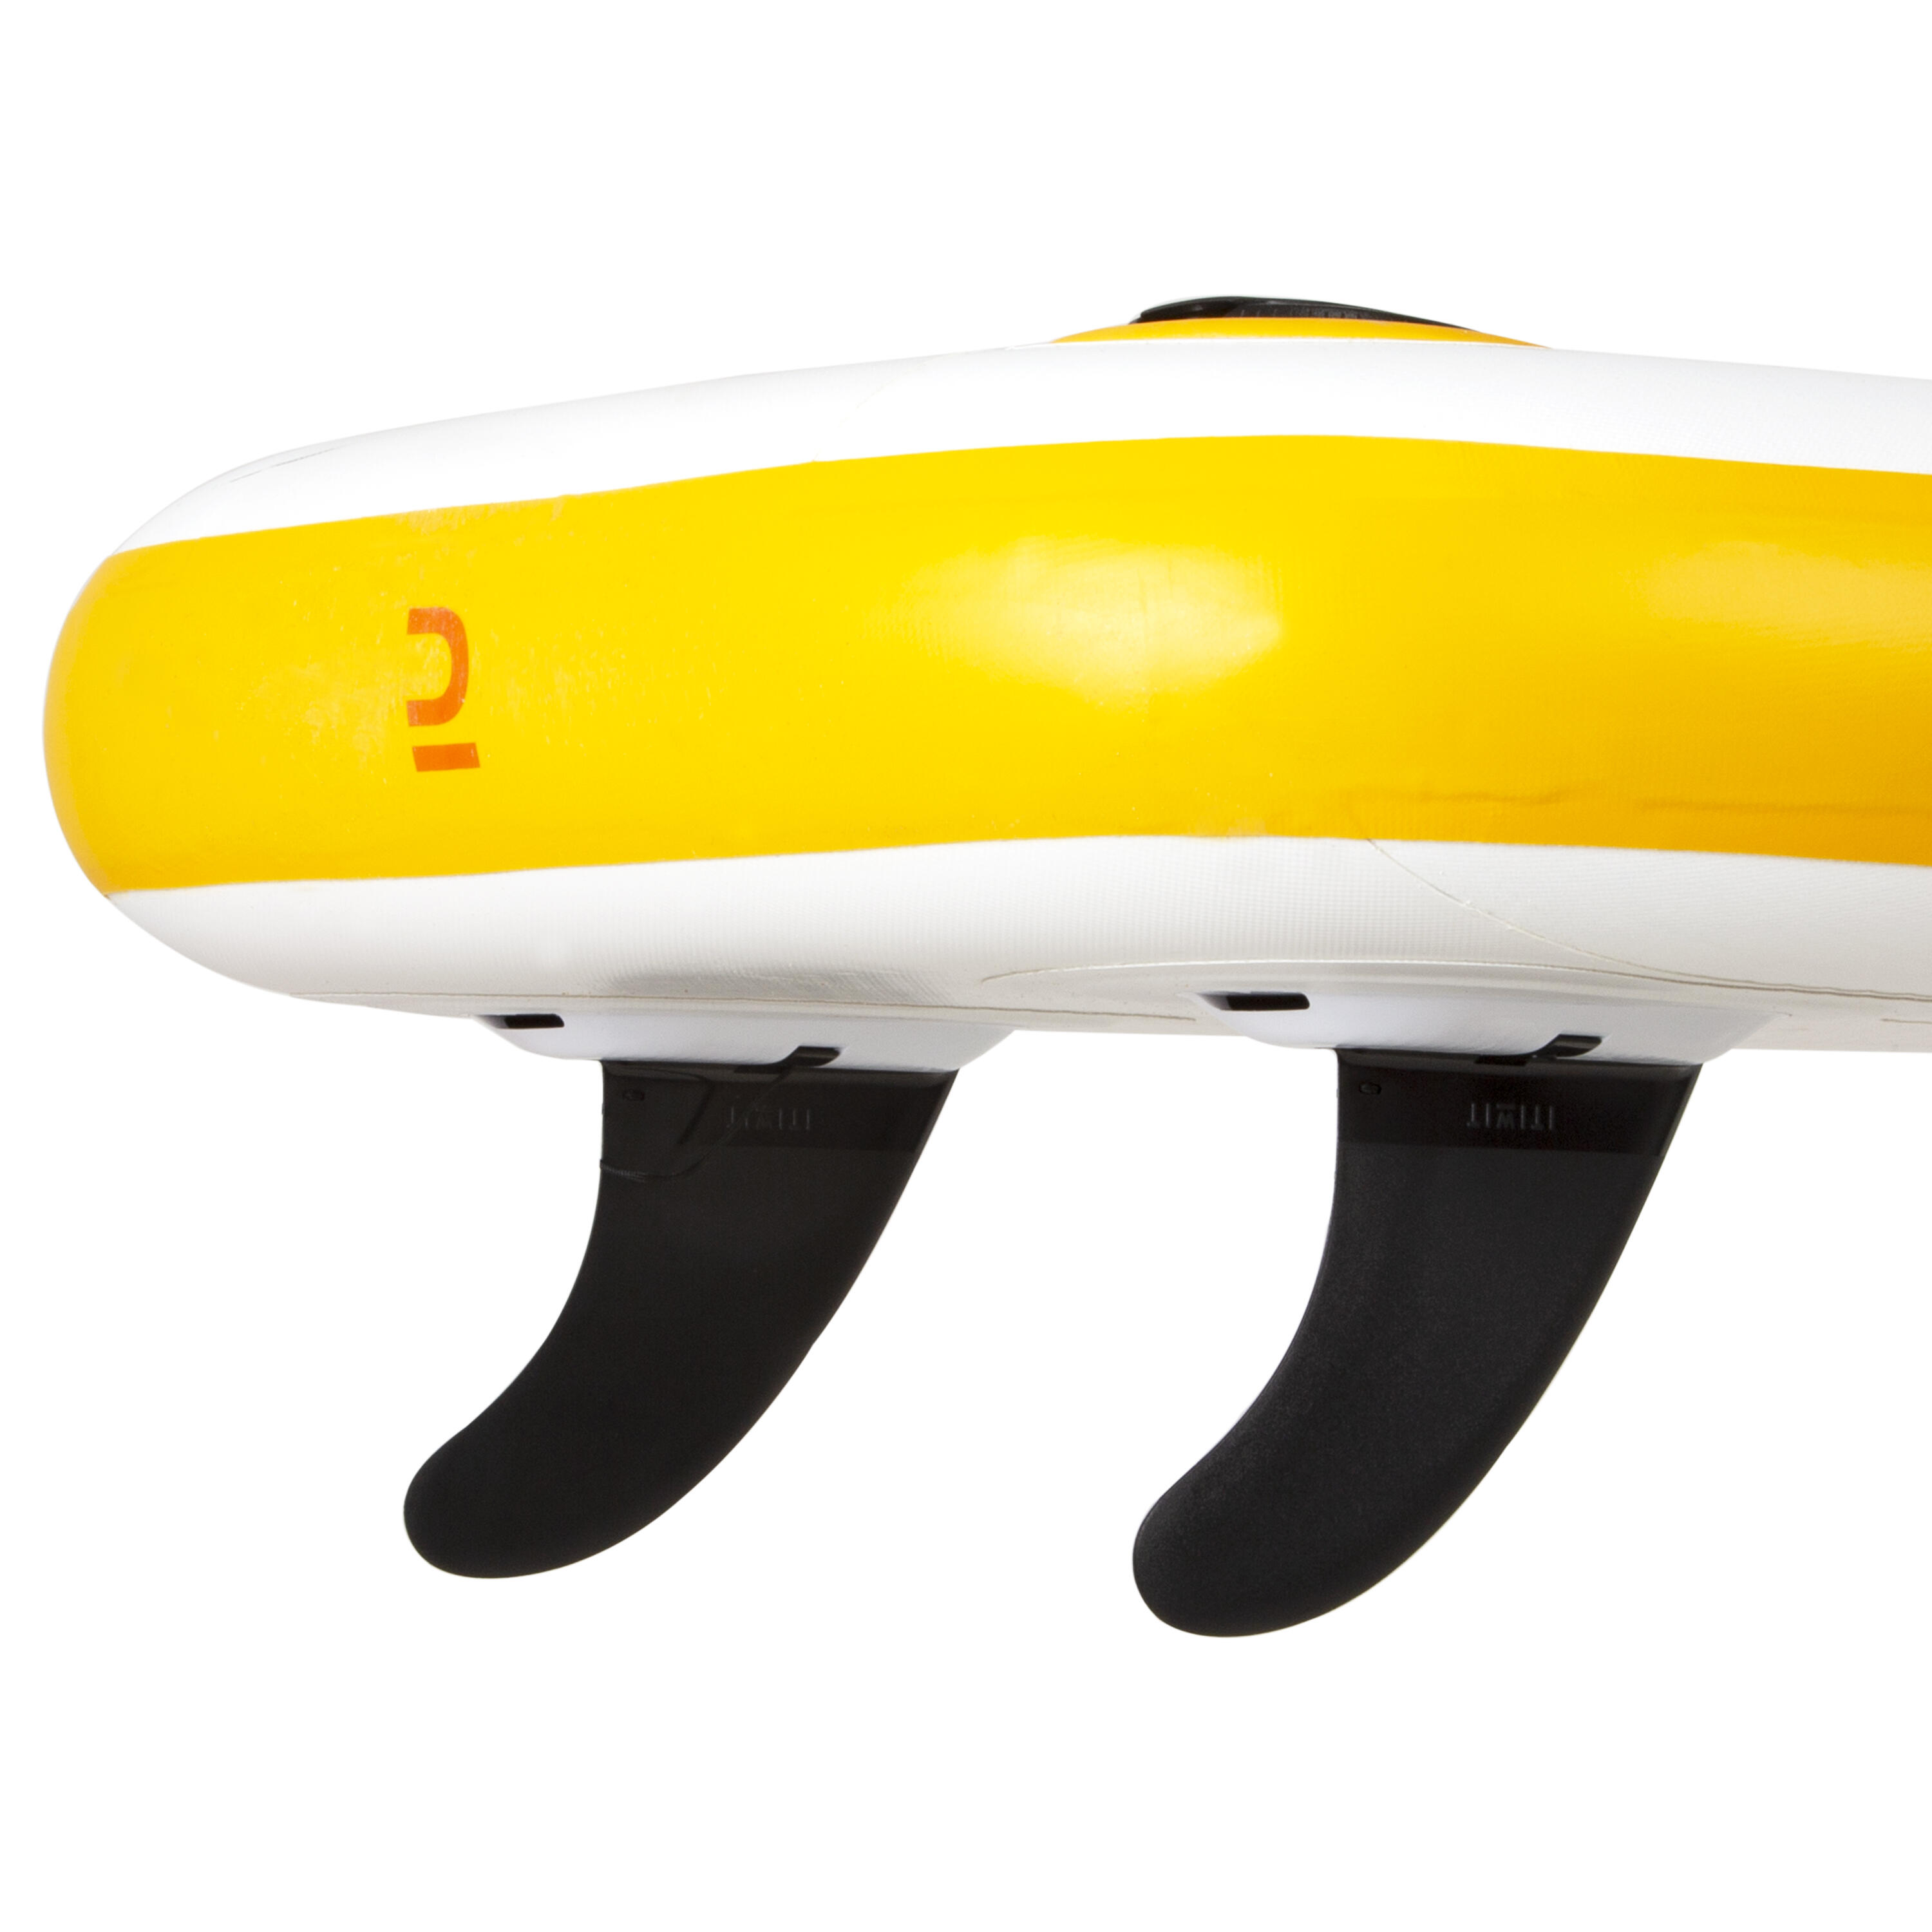 100 COMPACT 8FT (S) INFLATABLE STAND-UP PADDLEBOARD - YELLOW/WHITE (up to 60kg) 9/31